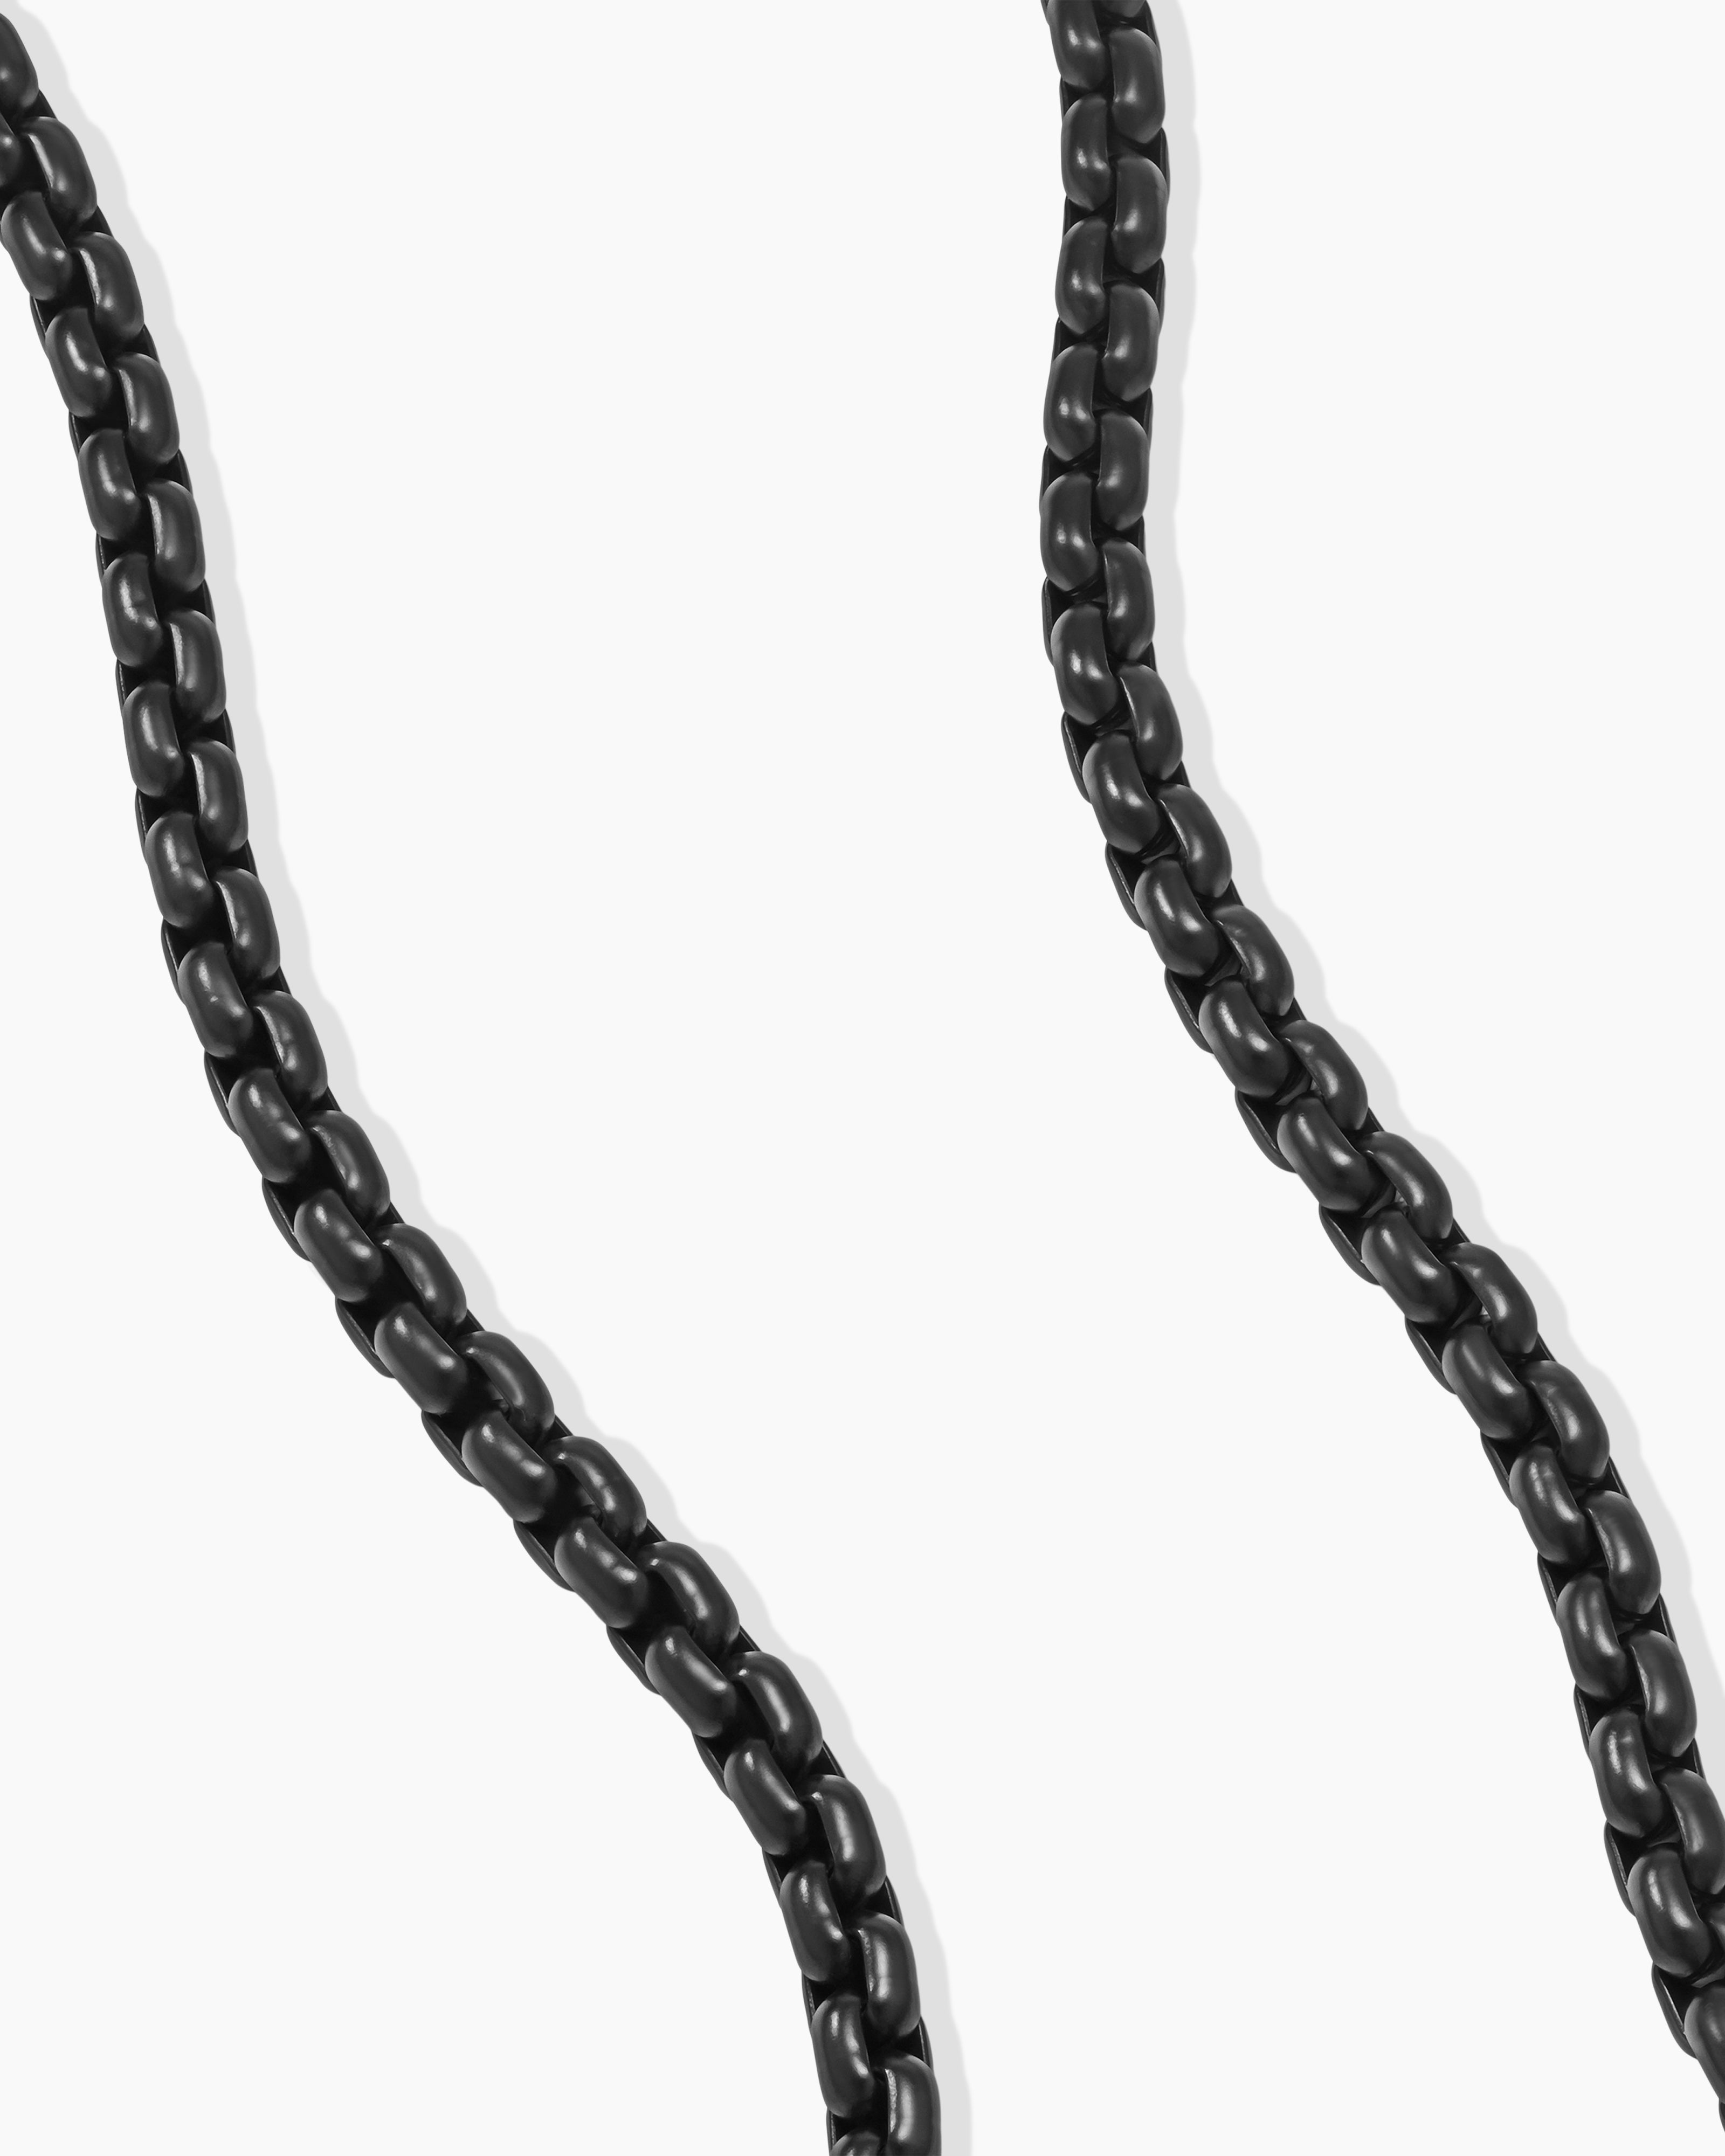 TINGN Silver Chain for Men 3mm 16 Inch Stainless Steel Silver Twist Rope Chain  Necklace for Men - Walmart.com